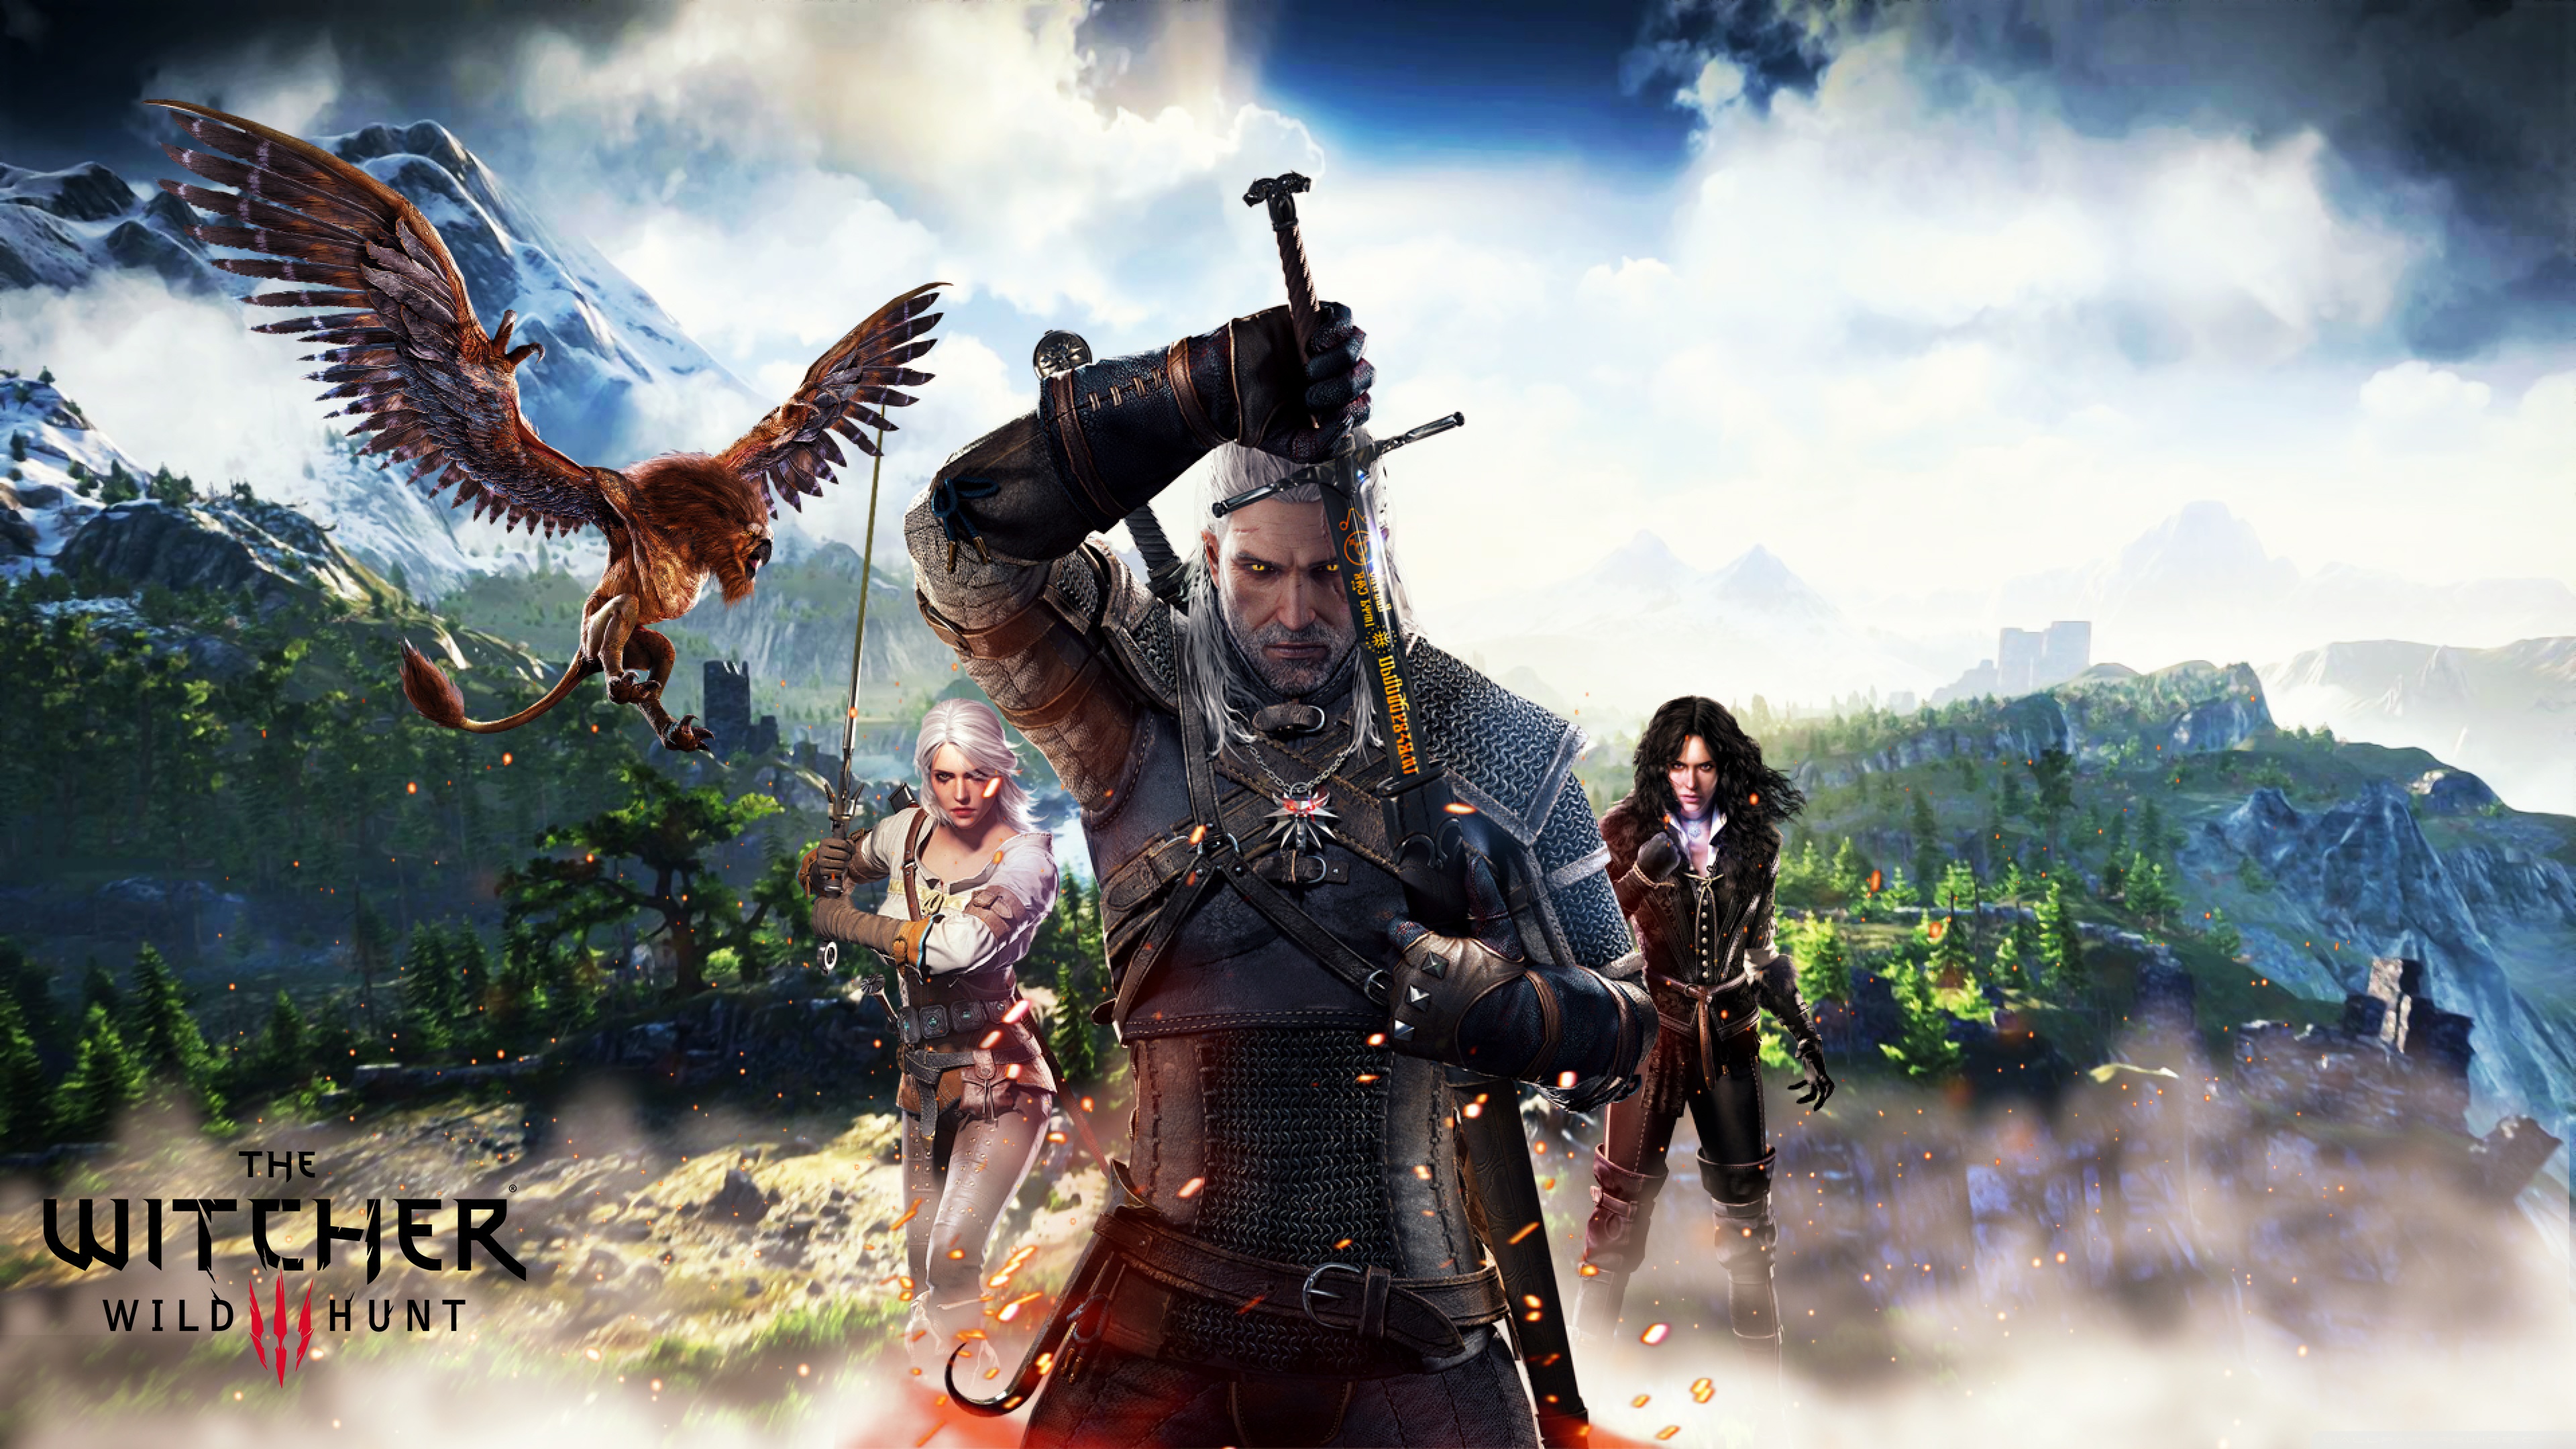 The Witcher 3 Wallpaper Hd